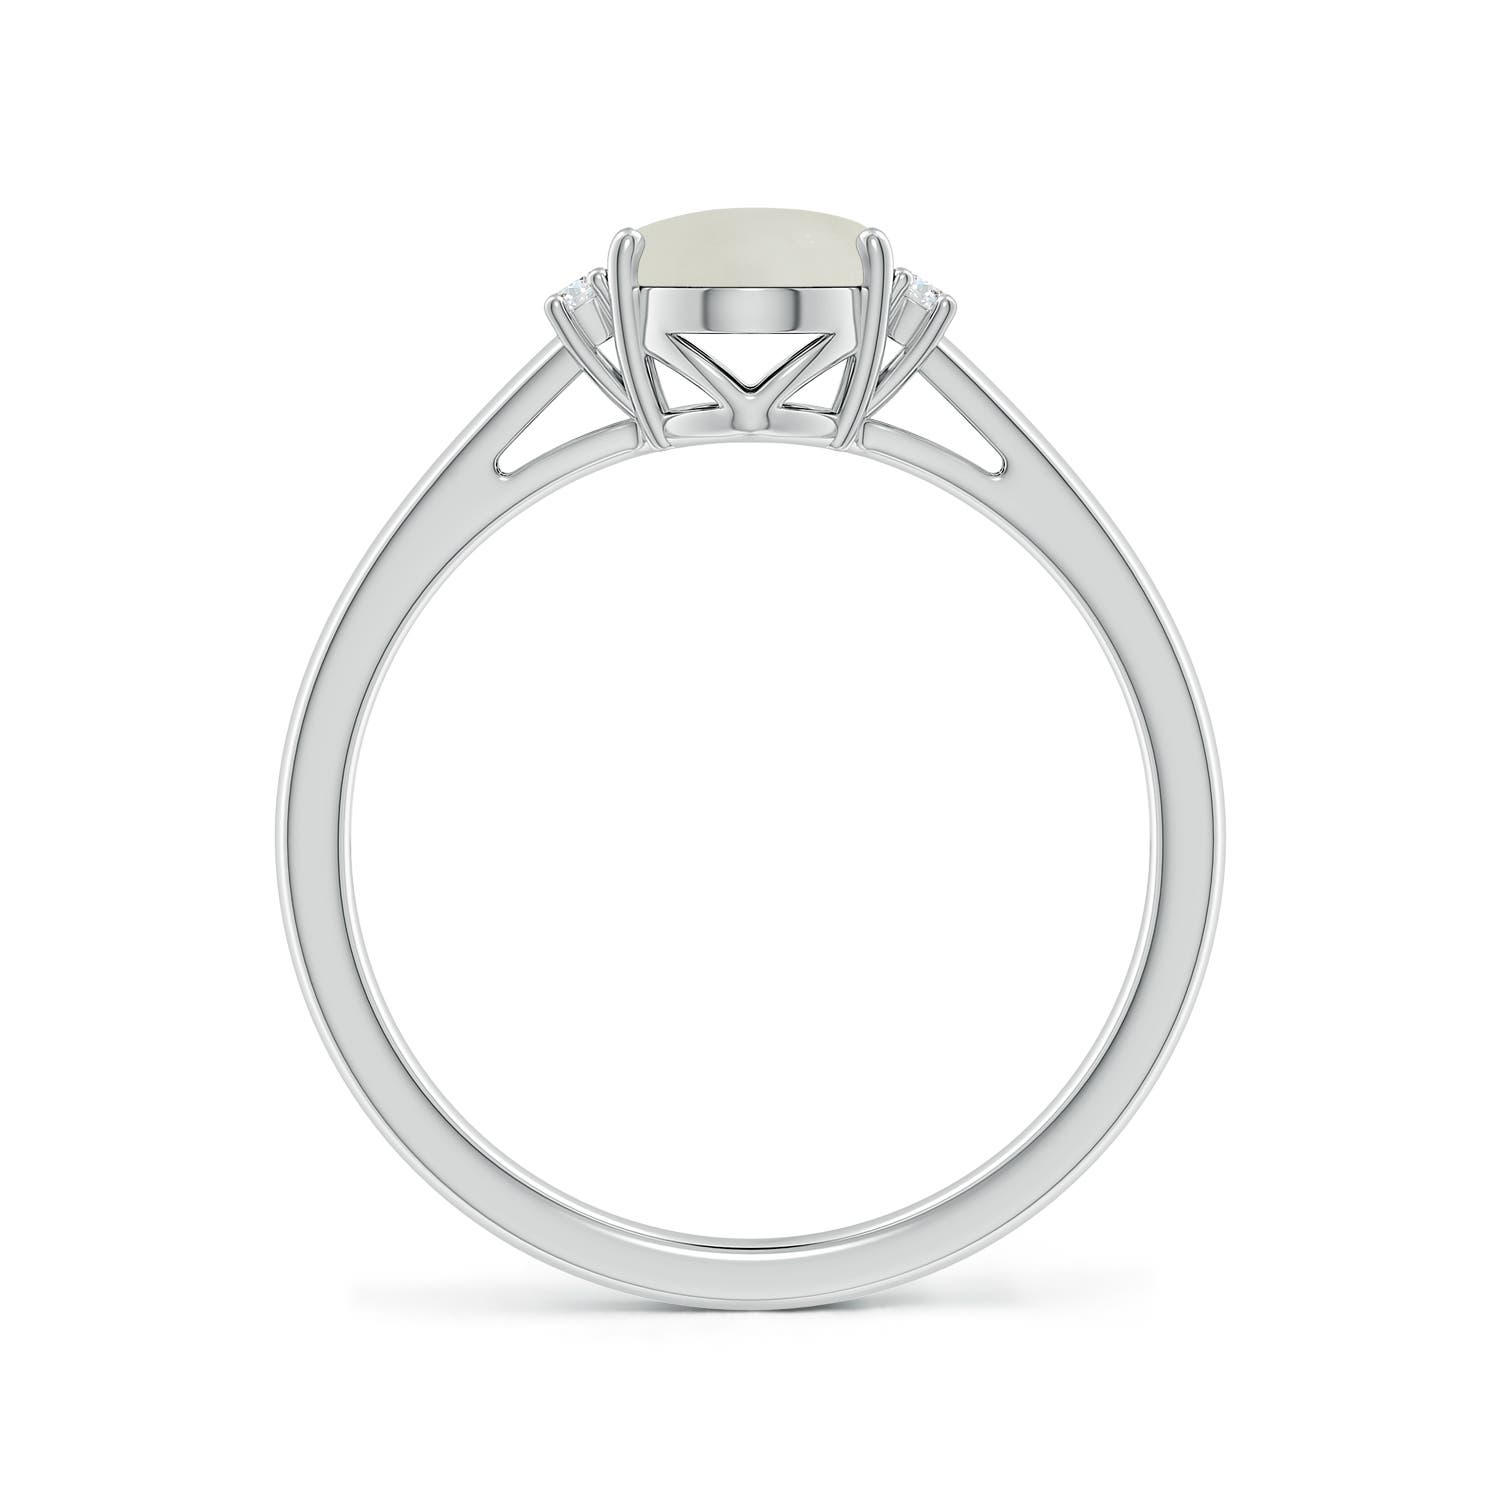 AAA - Moonstone / 1.17 CT / 14 KT White Gold